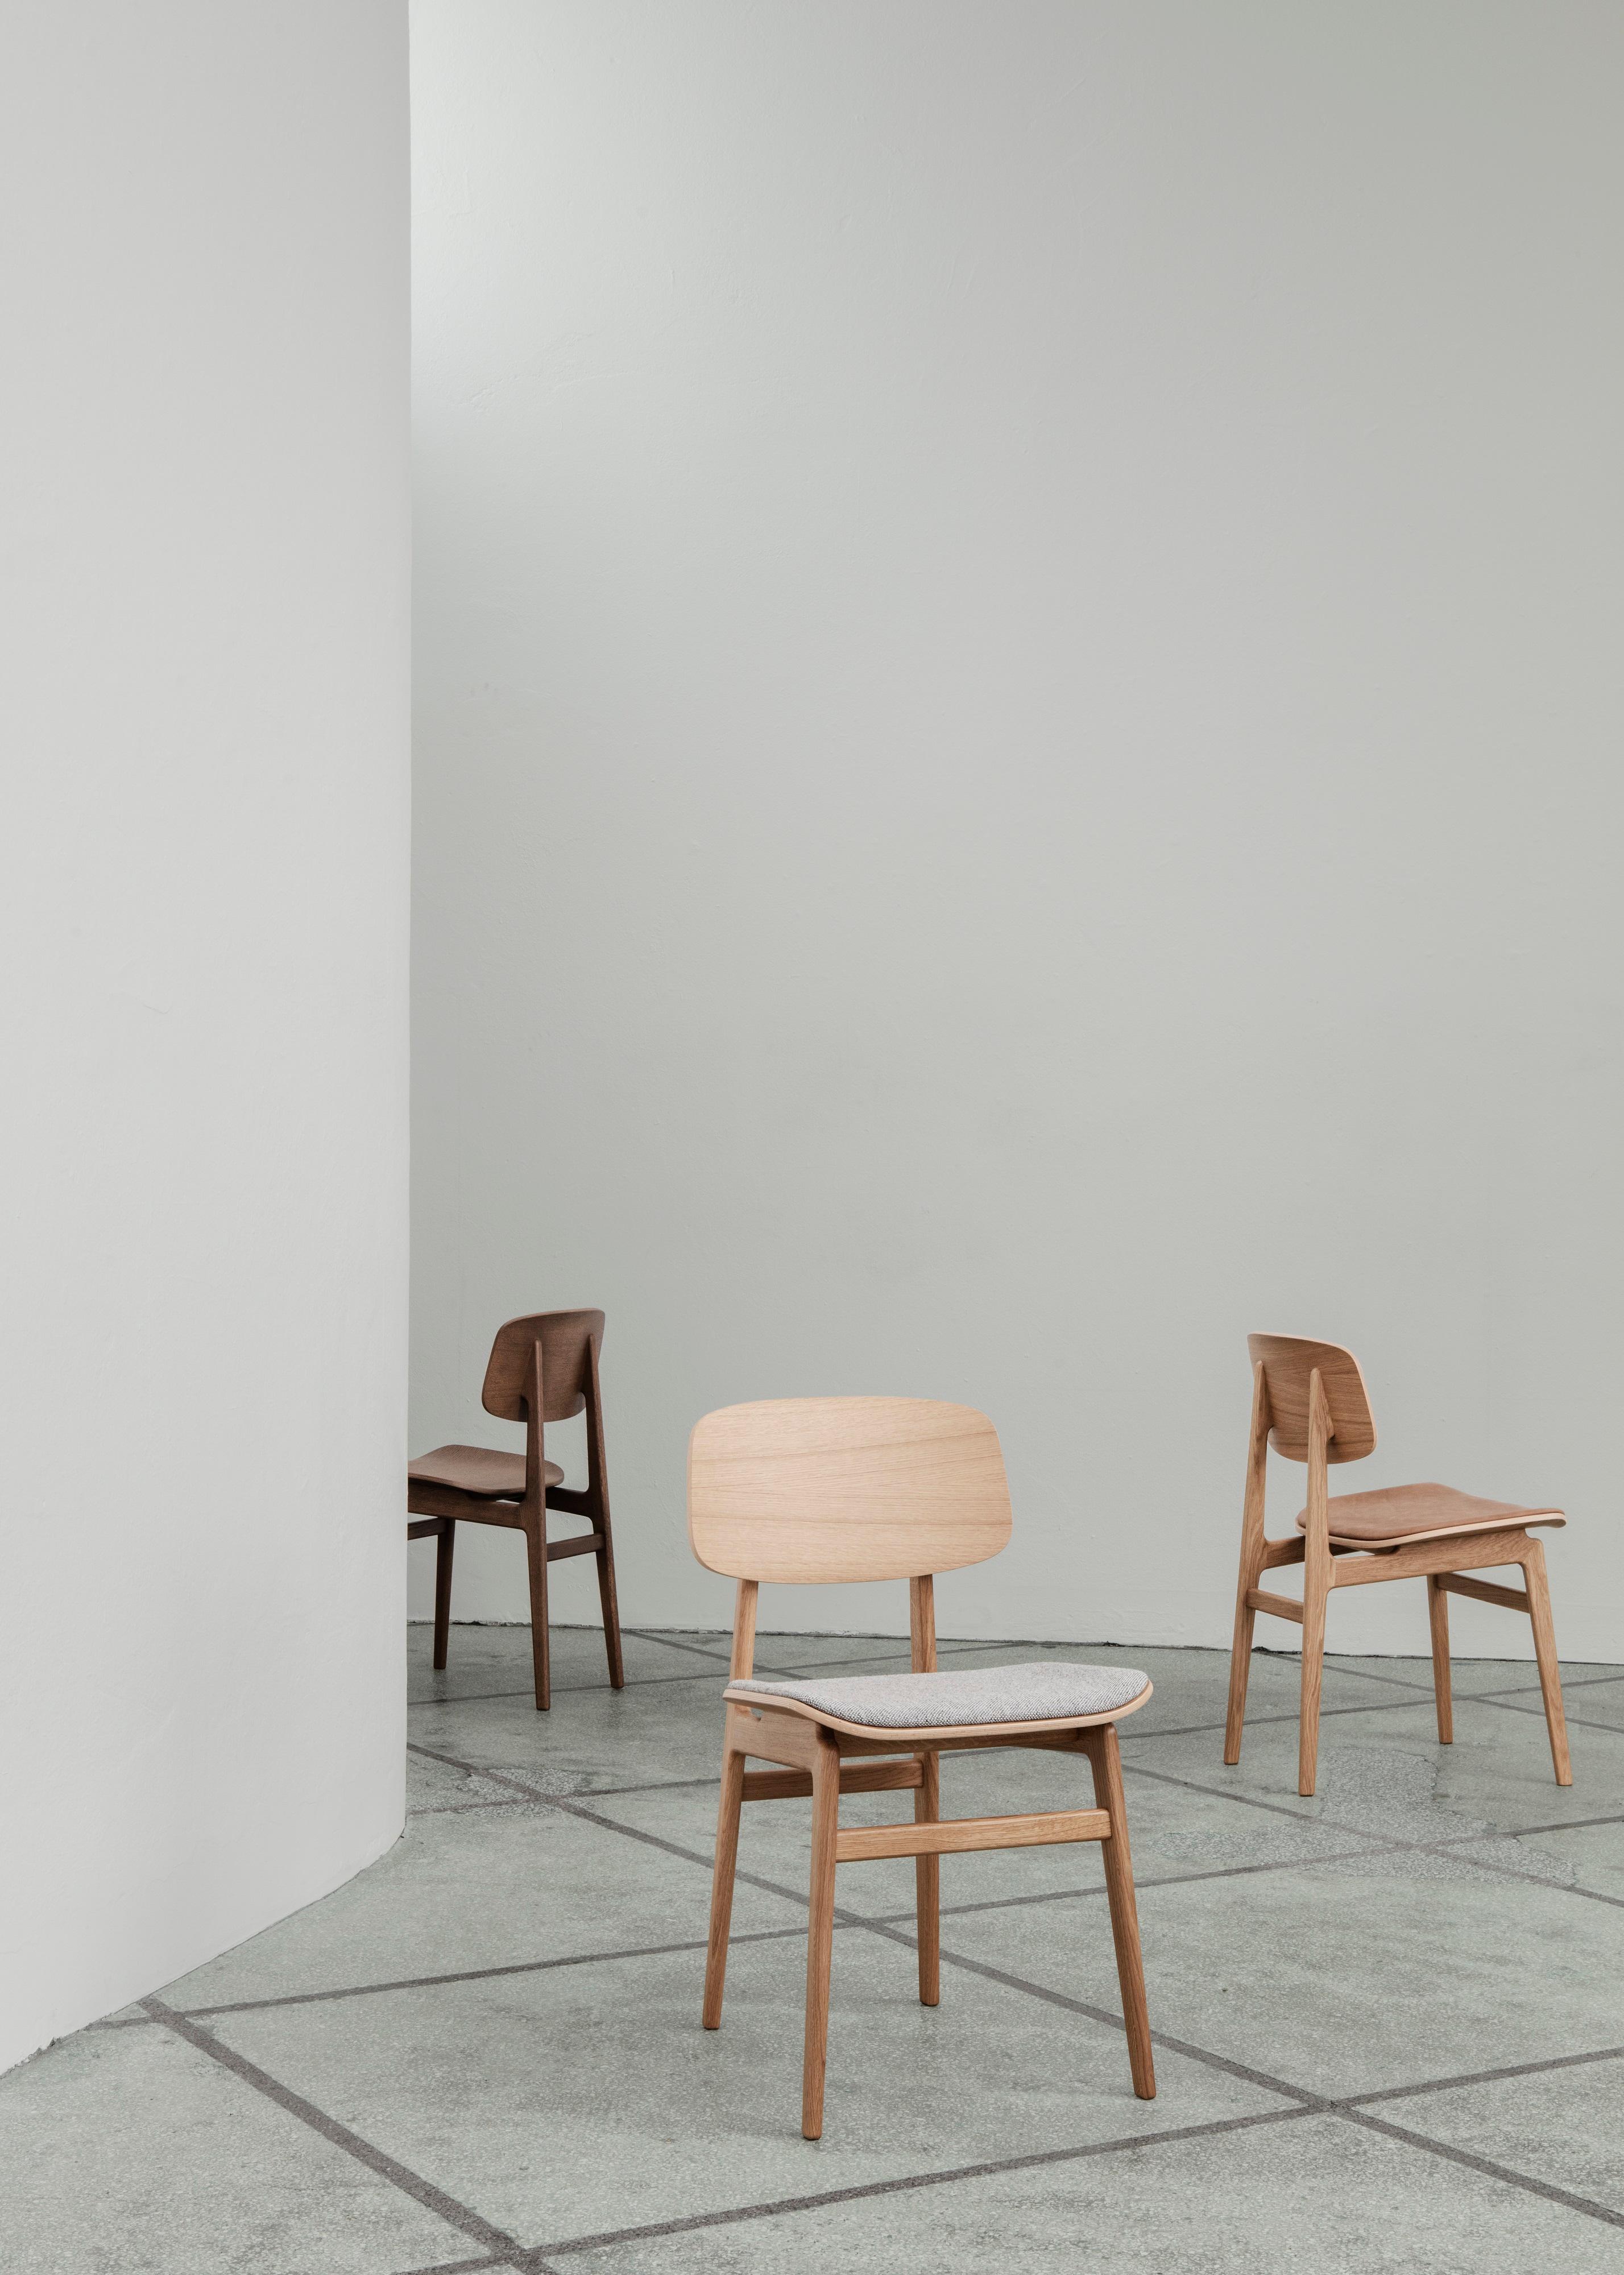 NY11 Chair by NORR11
Dimensions: D 52 x W 45,5 x H 78 cm. SH 45,5 cm / SH w. upholstery 46,5 cm.
Materials: Light smoked oak and upholstery.
Upholstery: Canvas 114.

Available in different oak finishes: Natural oak, light smoked oak, dark smoked